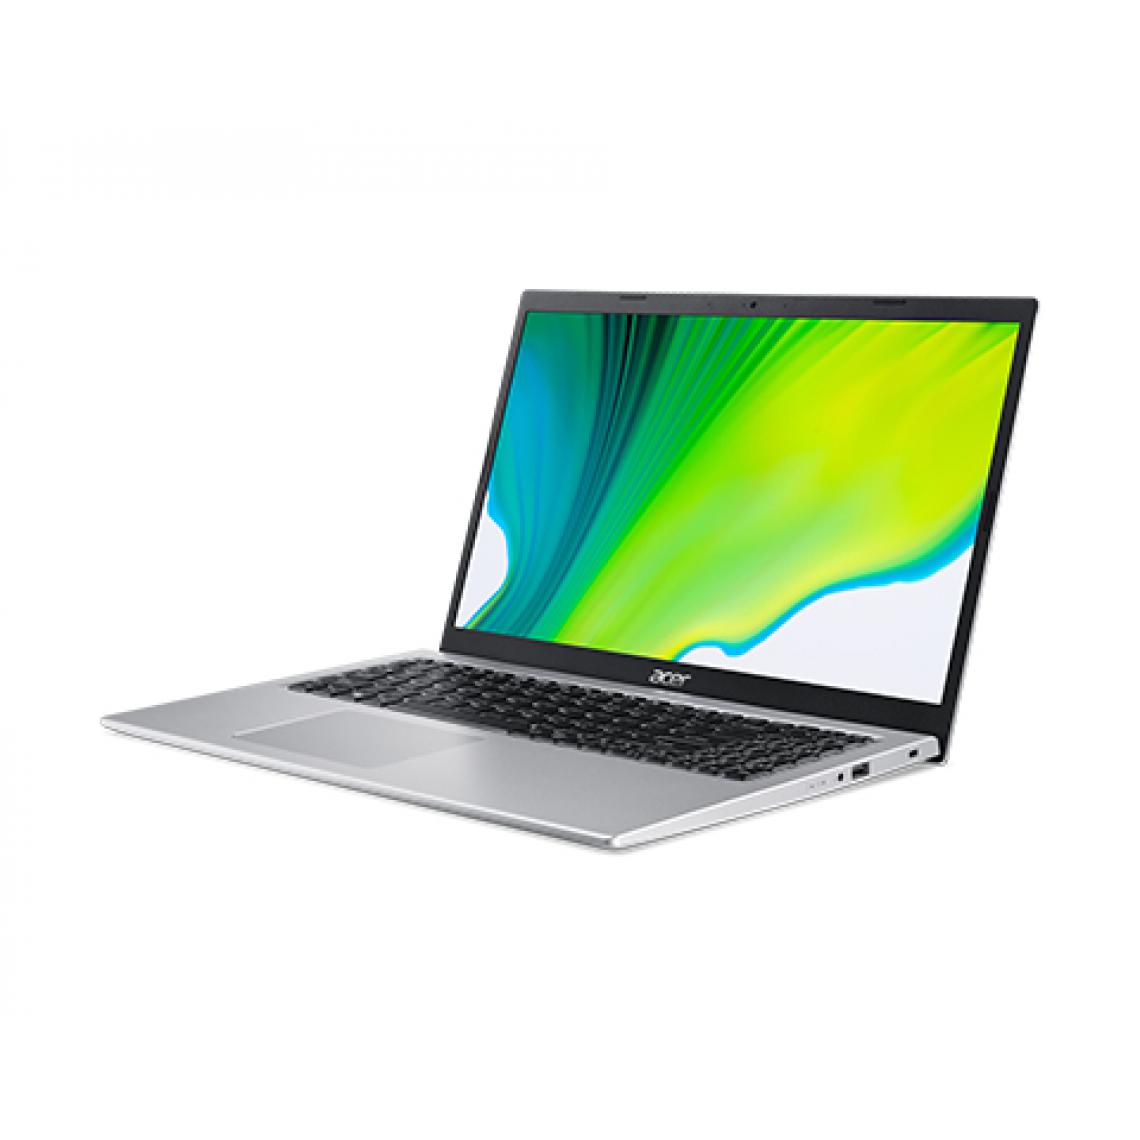 Acer - A515-56-32R1 i3-1115G4 15.6p A515-56-32R1 Intel Core i3-1115G4 15.6p FHD IPS 8Go 256Go PCIe NVMe SSD + Graphic Card Integrated W10P 3a - PC Portable